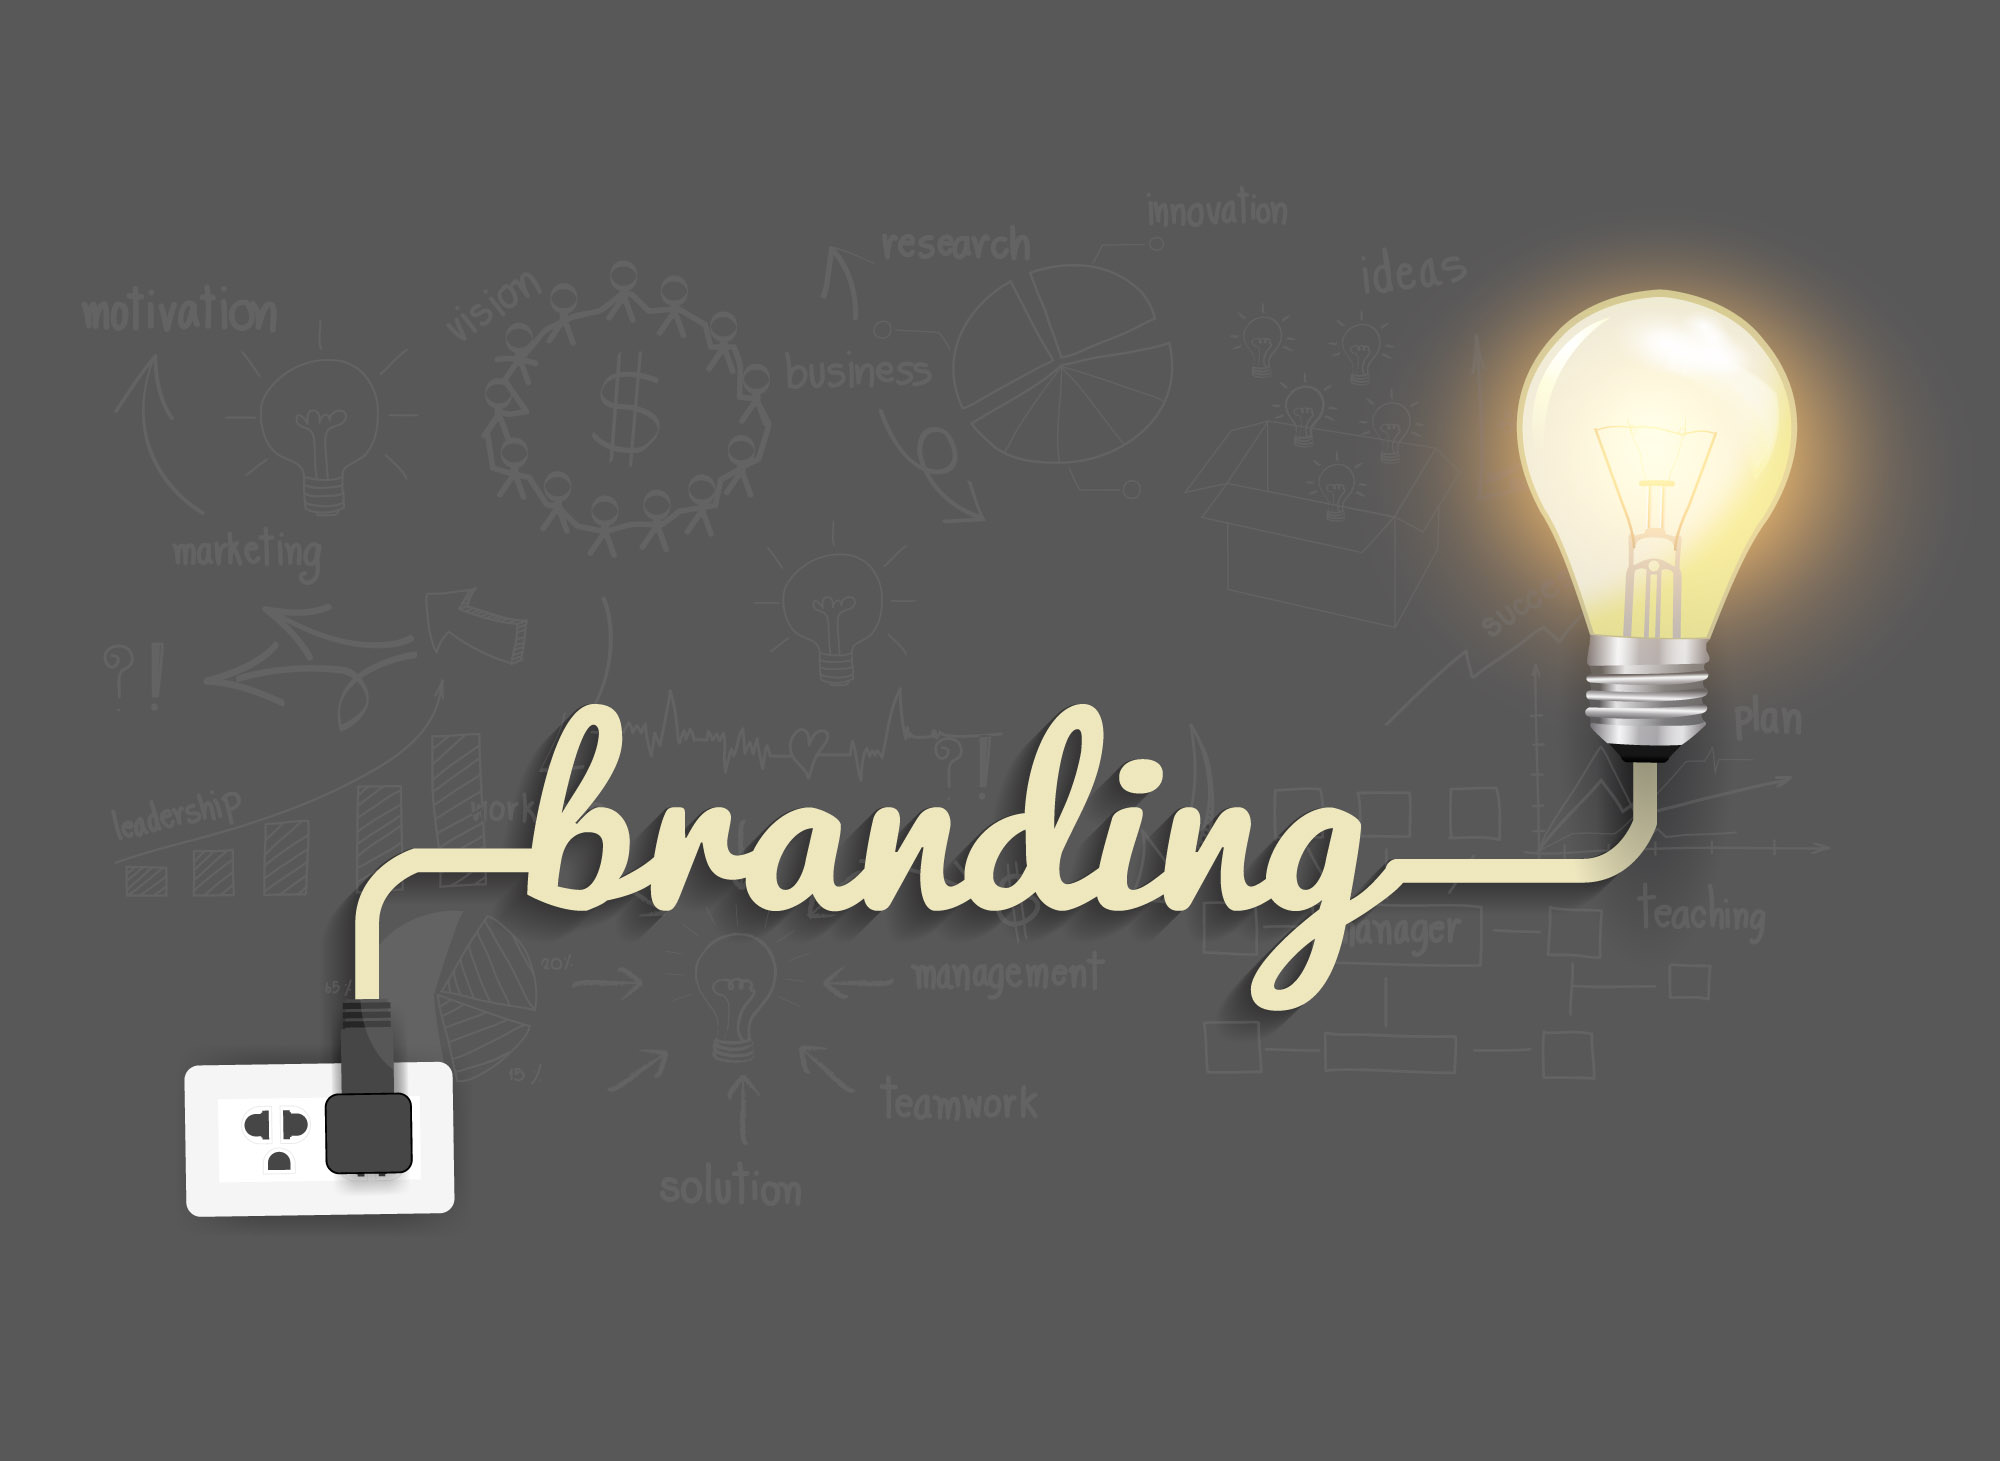 Why Branding Your eLearning Business Is About More Than Just Your Logo cover image